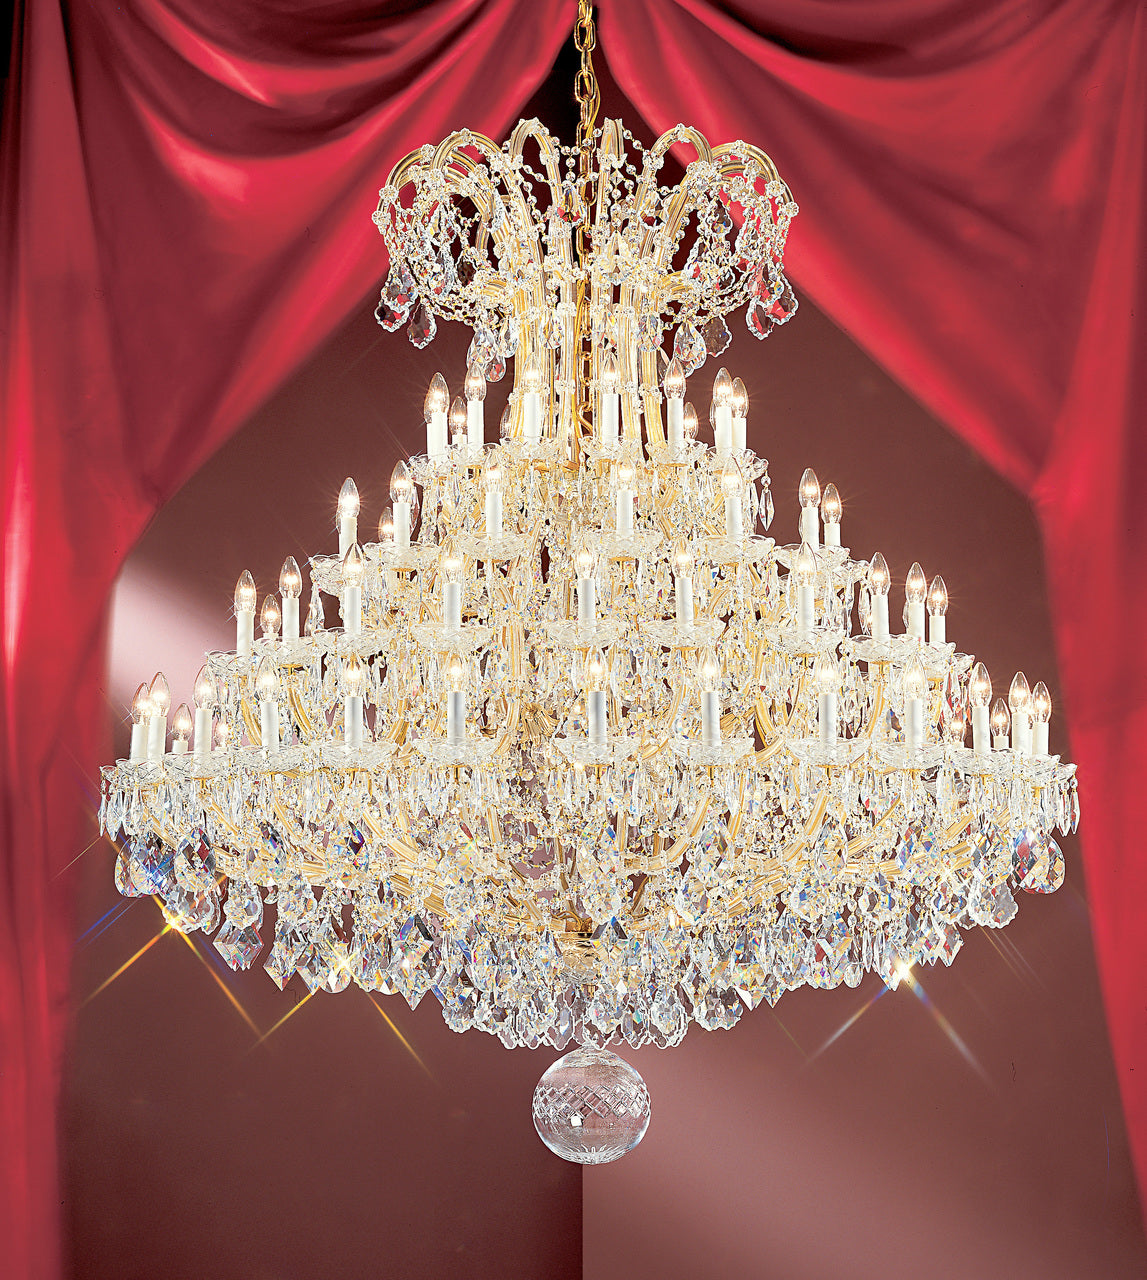 Classic Lighting 8167 OWG SC Maria Theresa Traditional Crystal Chandelier in Olde World Gold (Imported from Italy)